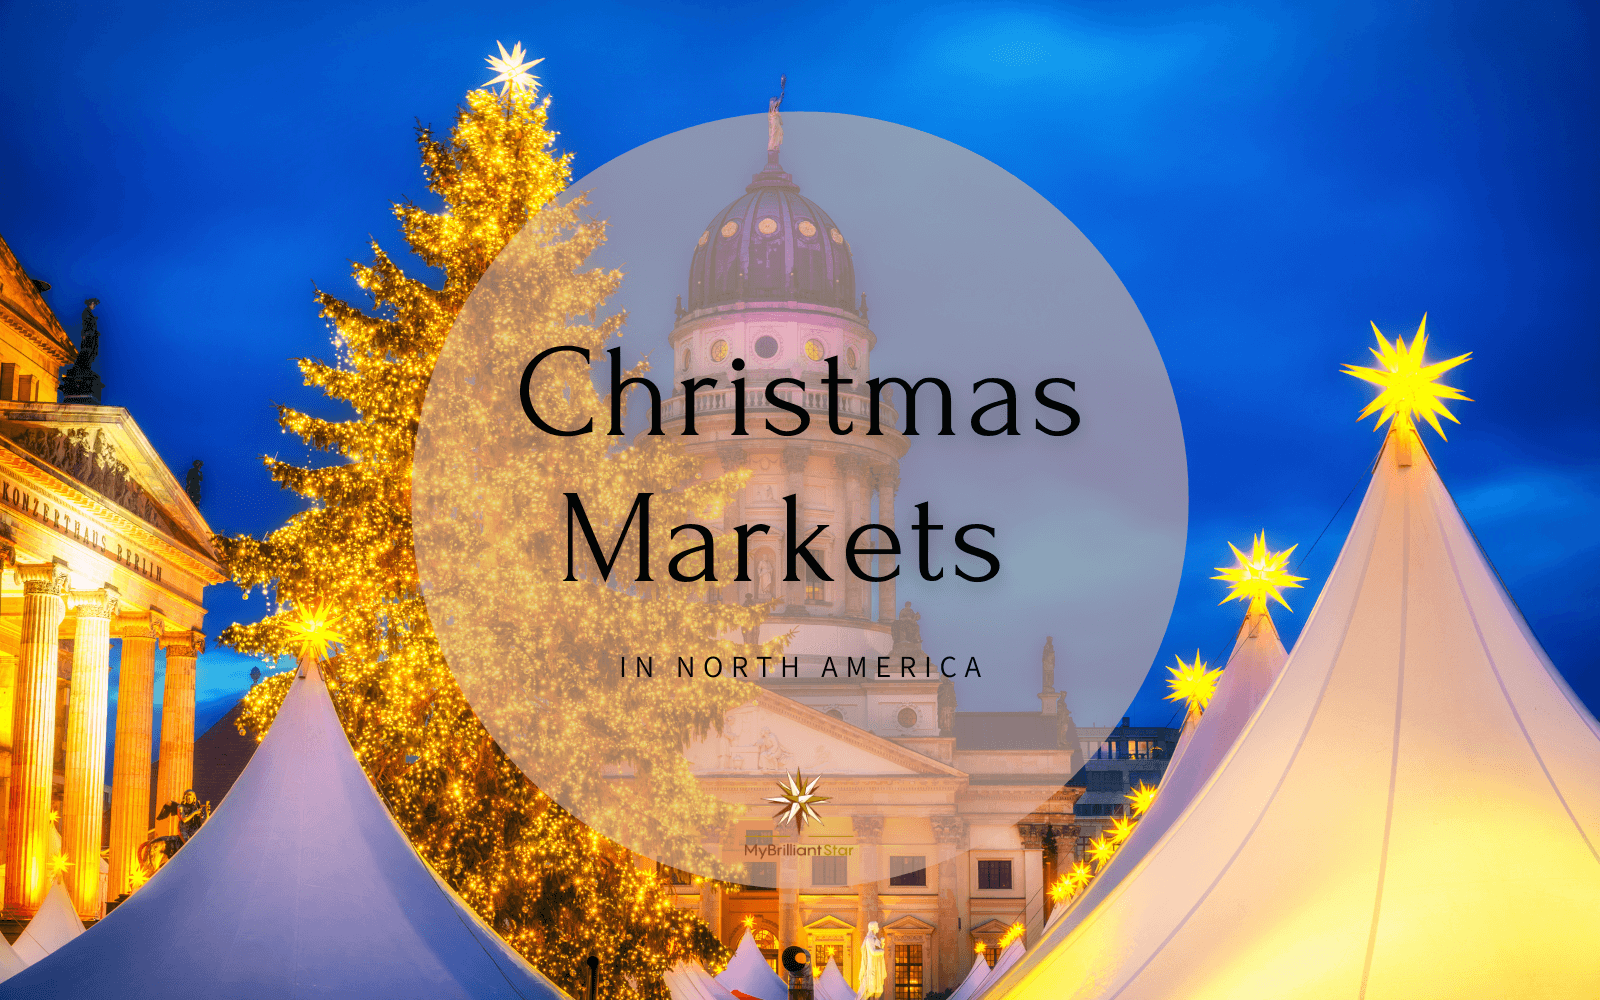 CHRISTMAS MARKETS IN NORTH AMERICA OPENING SOON